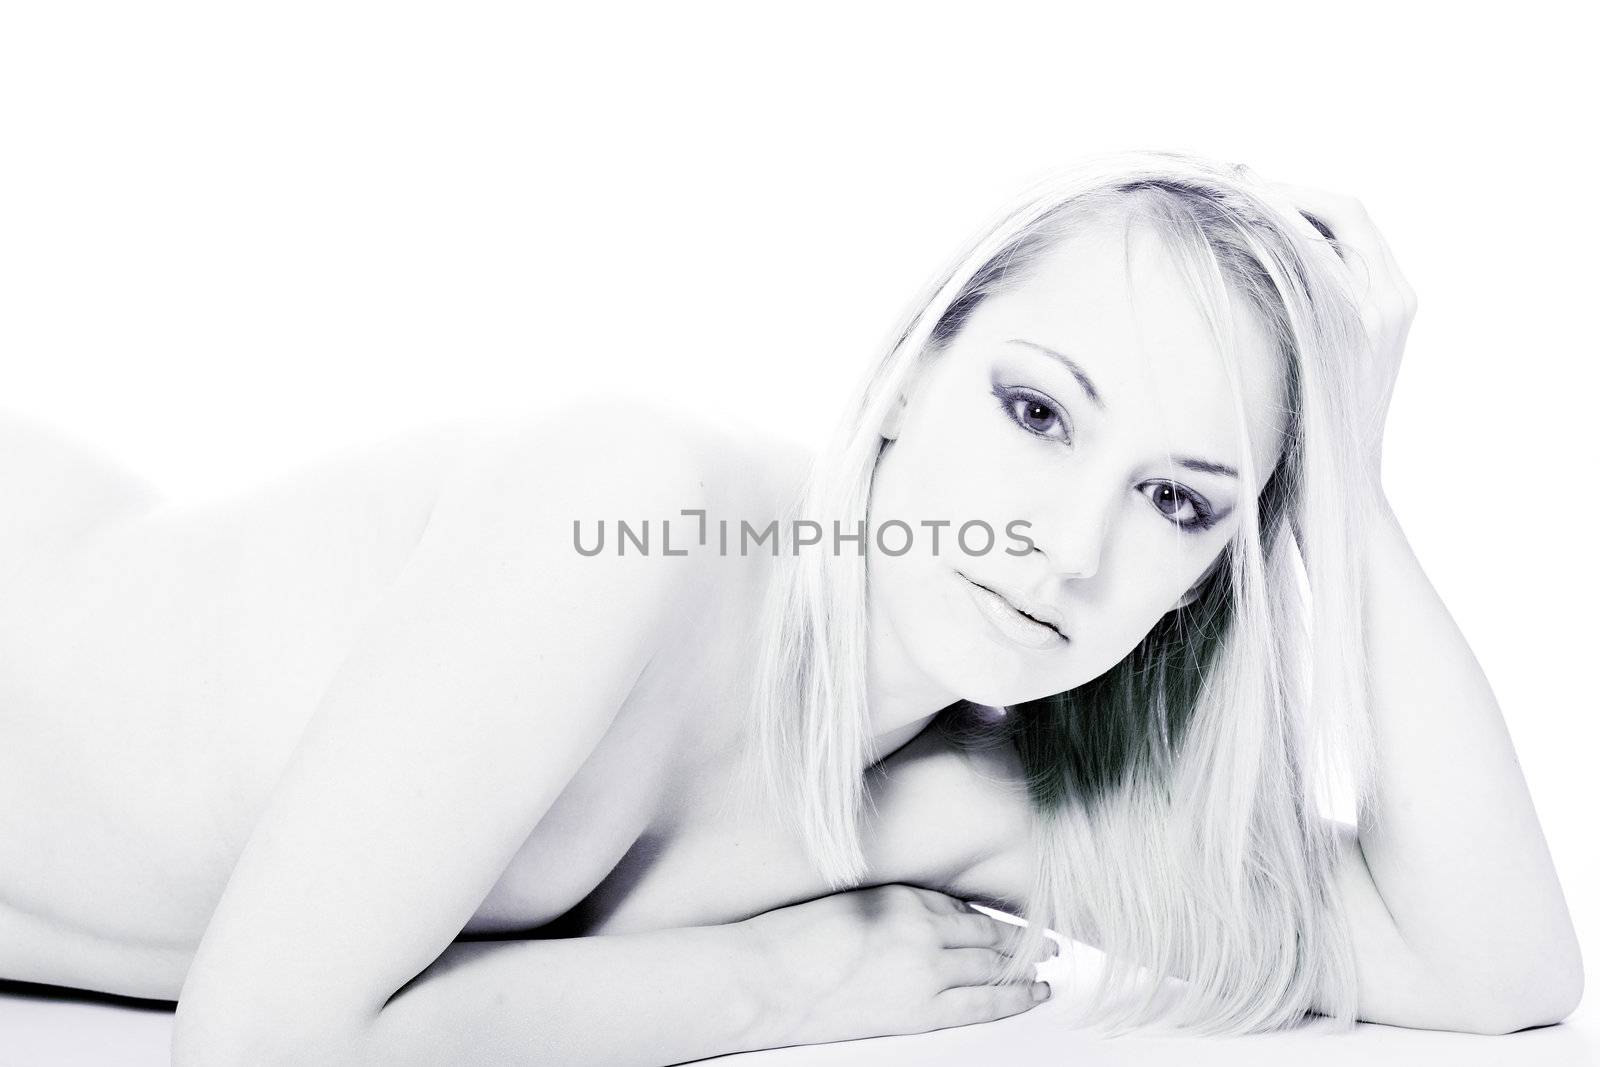 Studio portrait of a young blond woman lying down naked